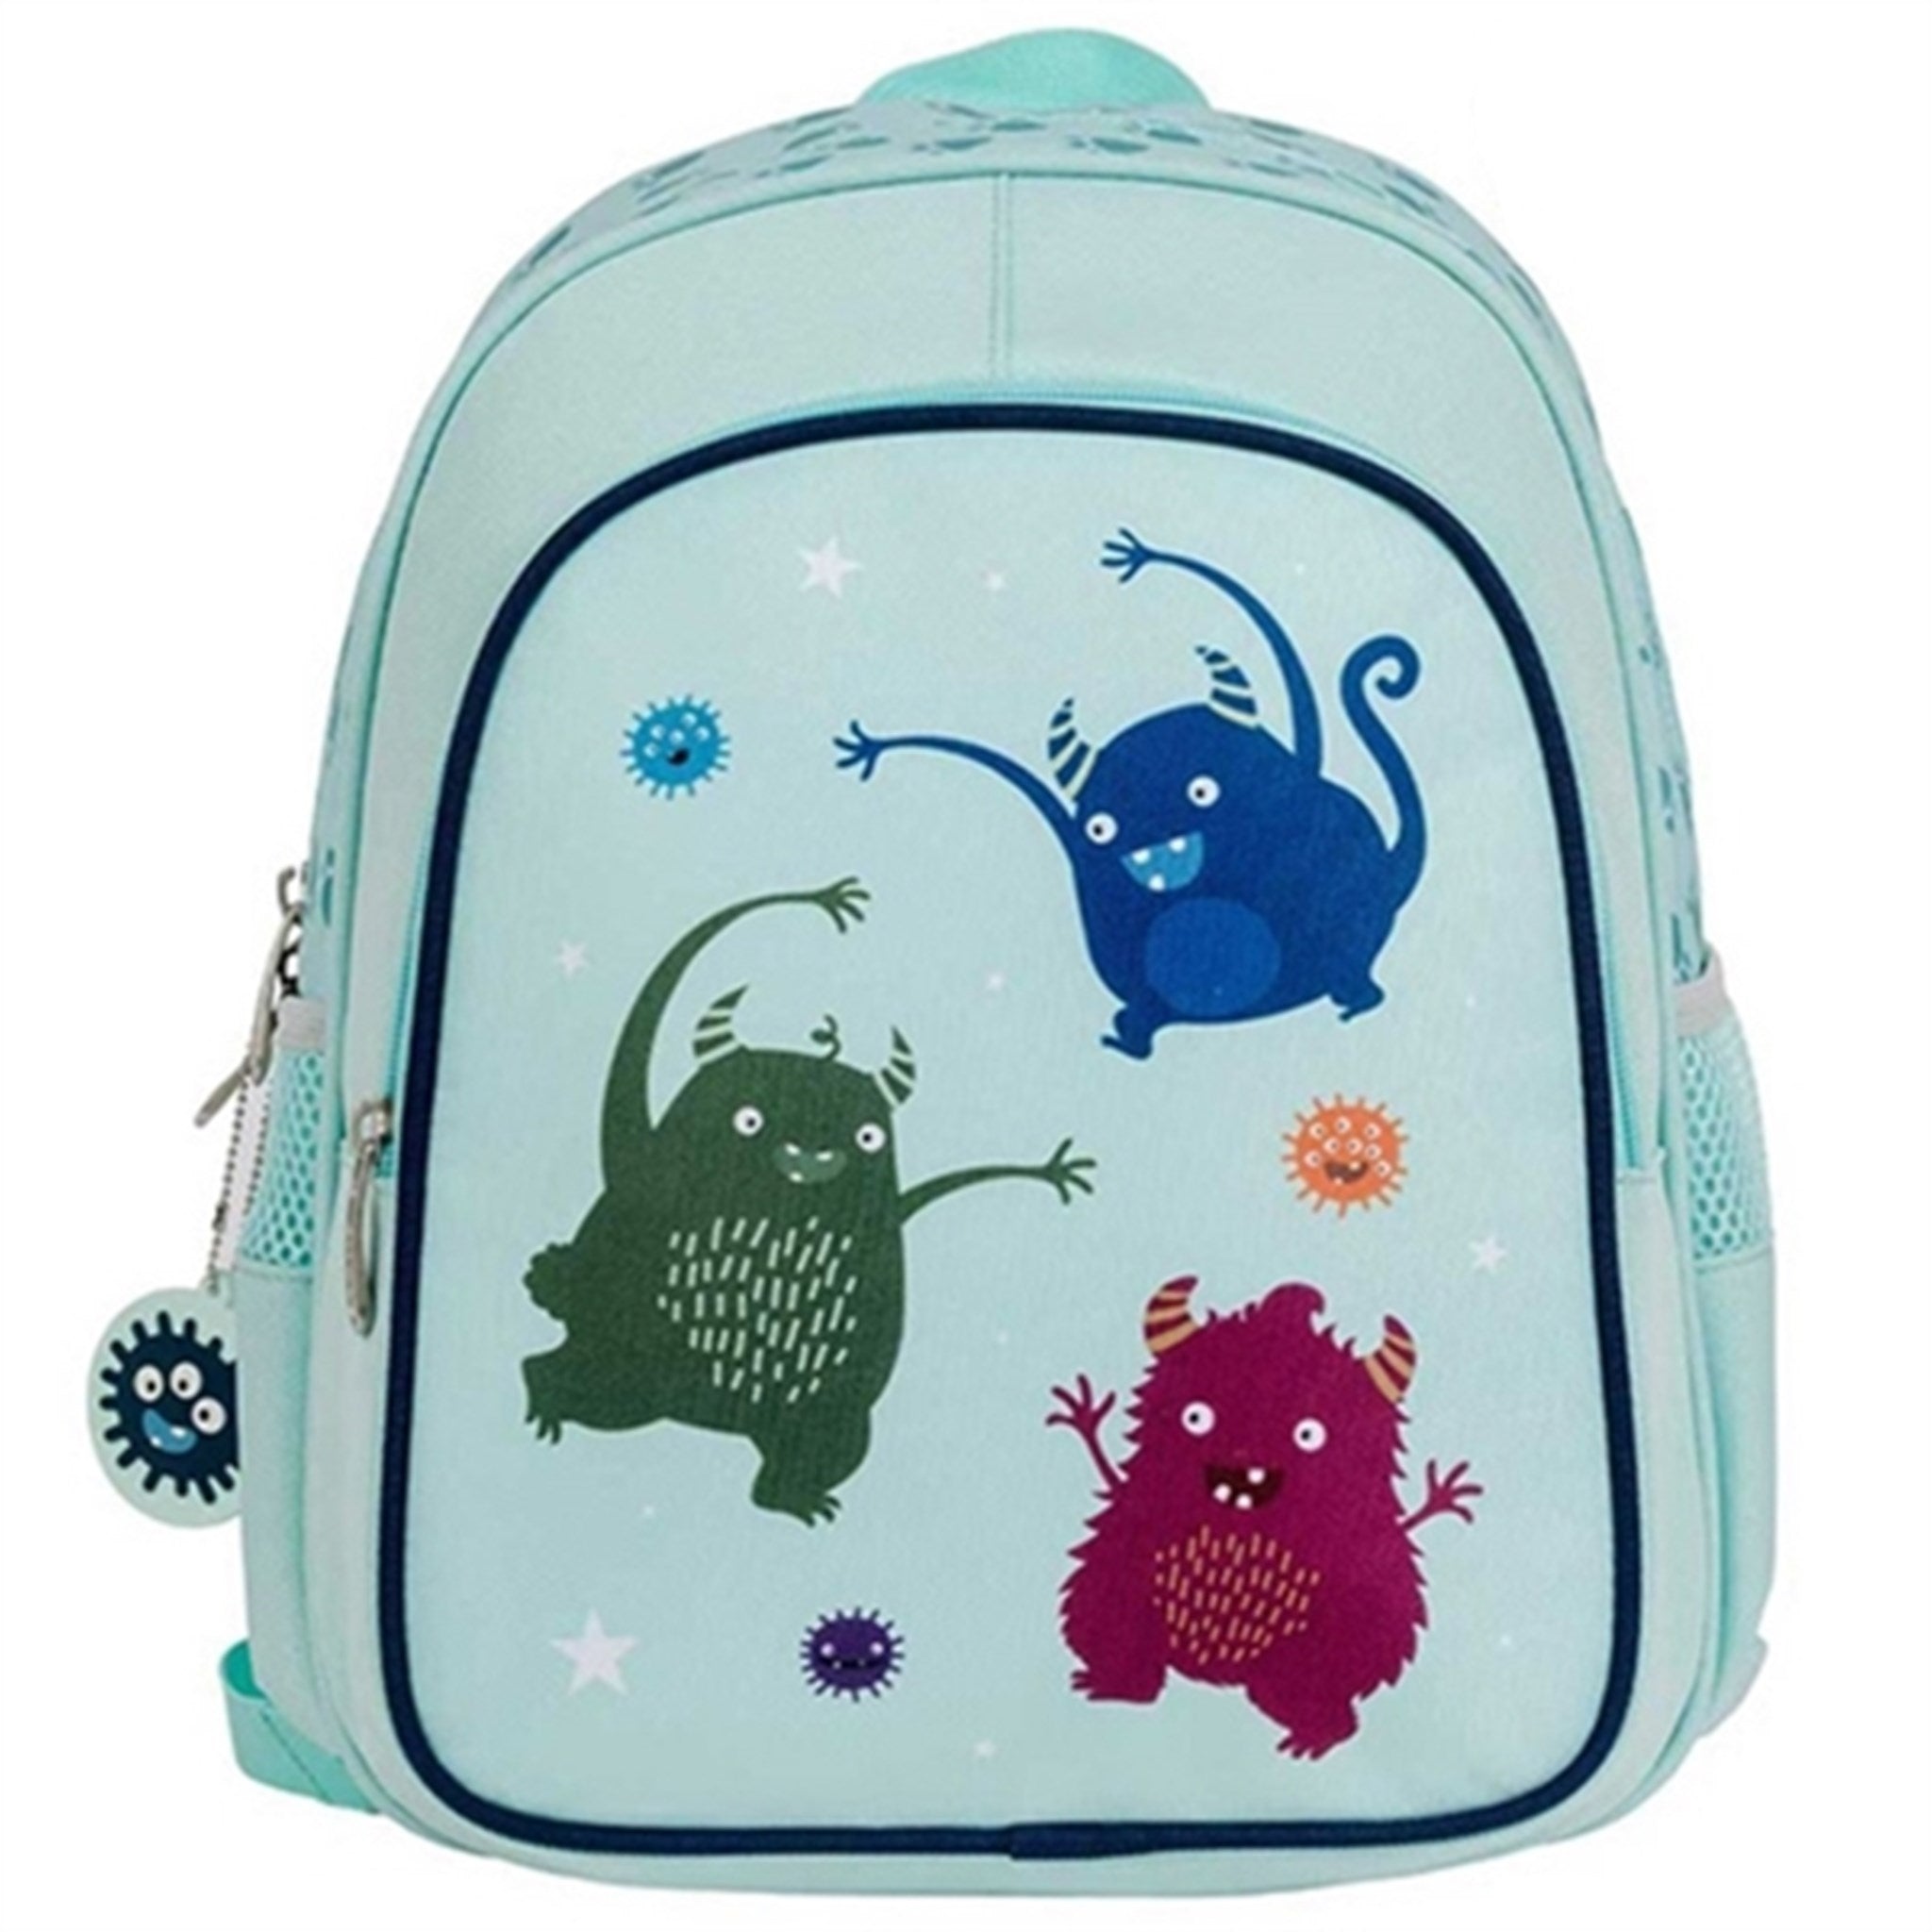 A Little Lovely Company Backpack Monsters